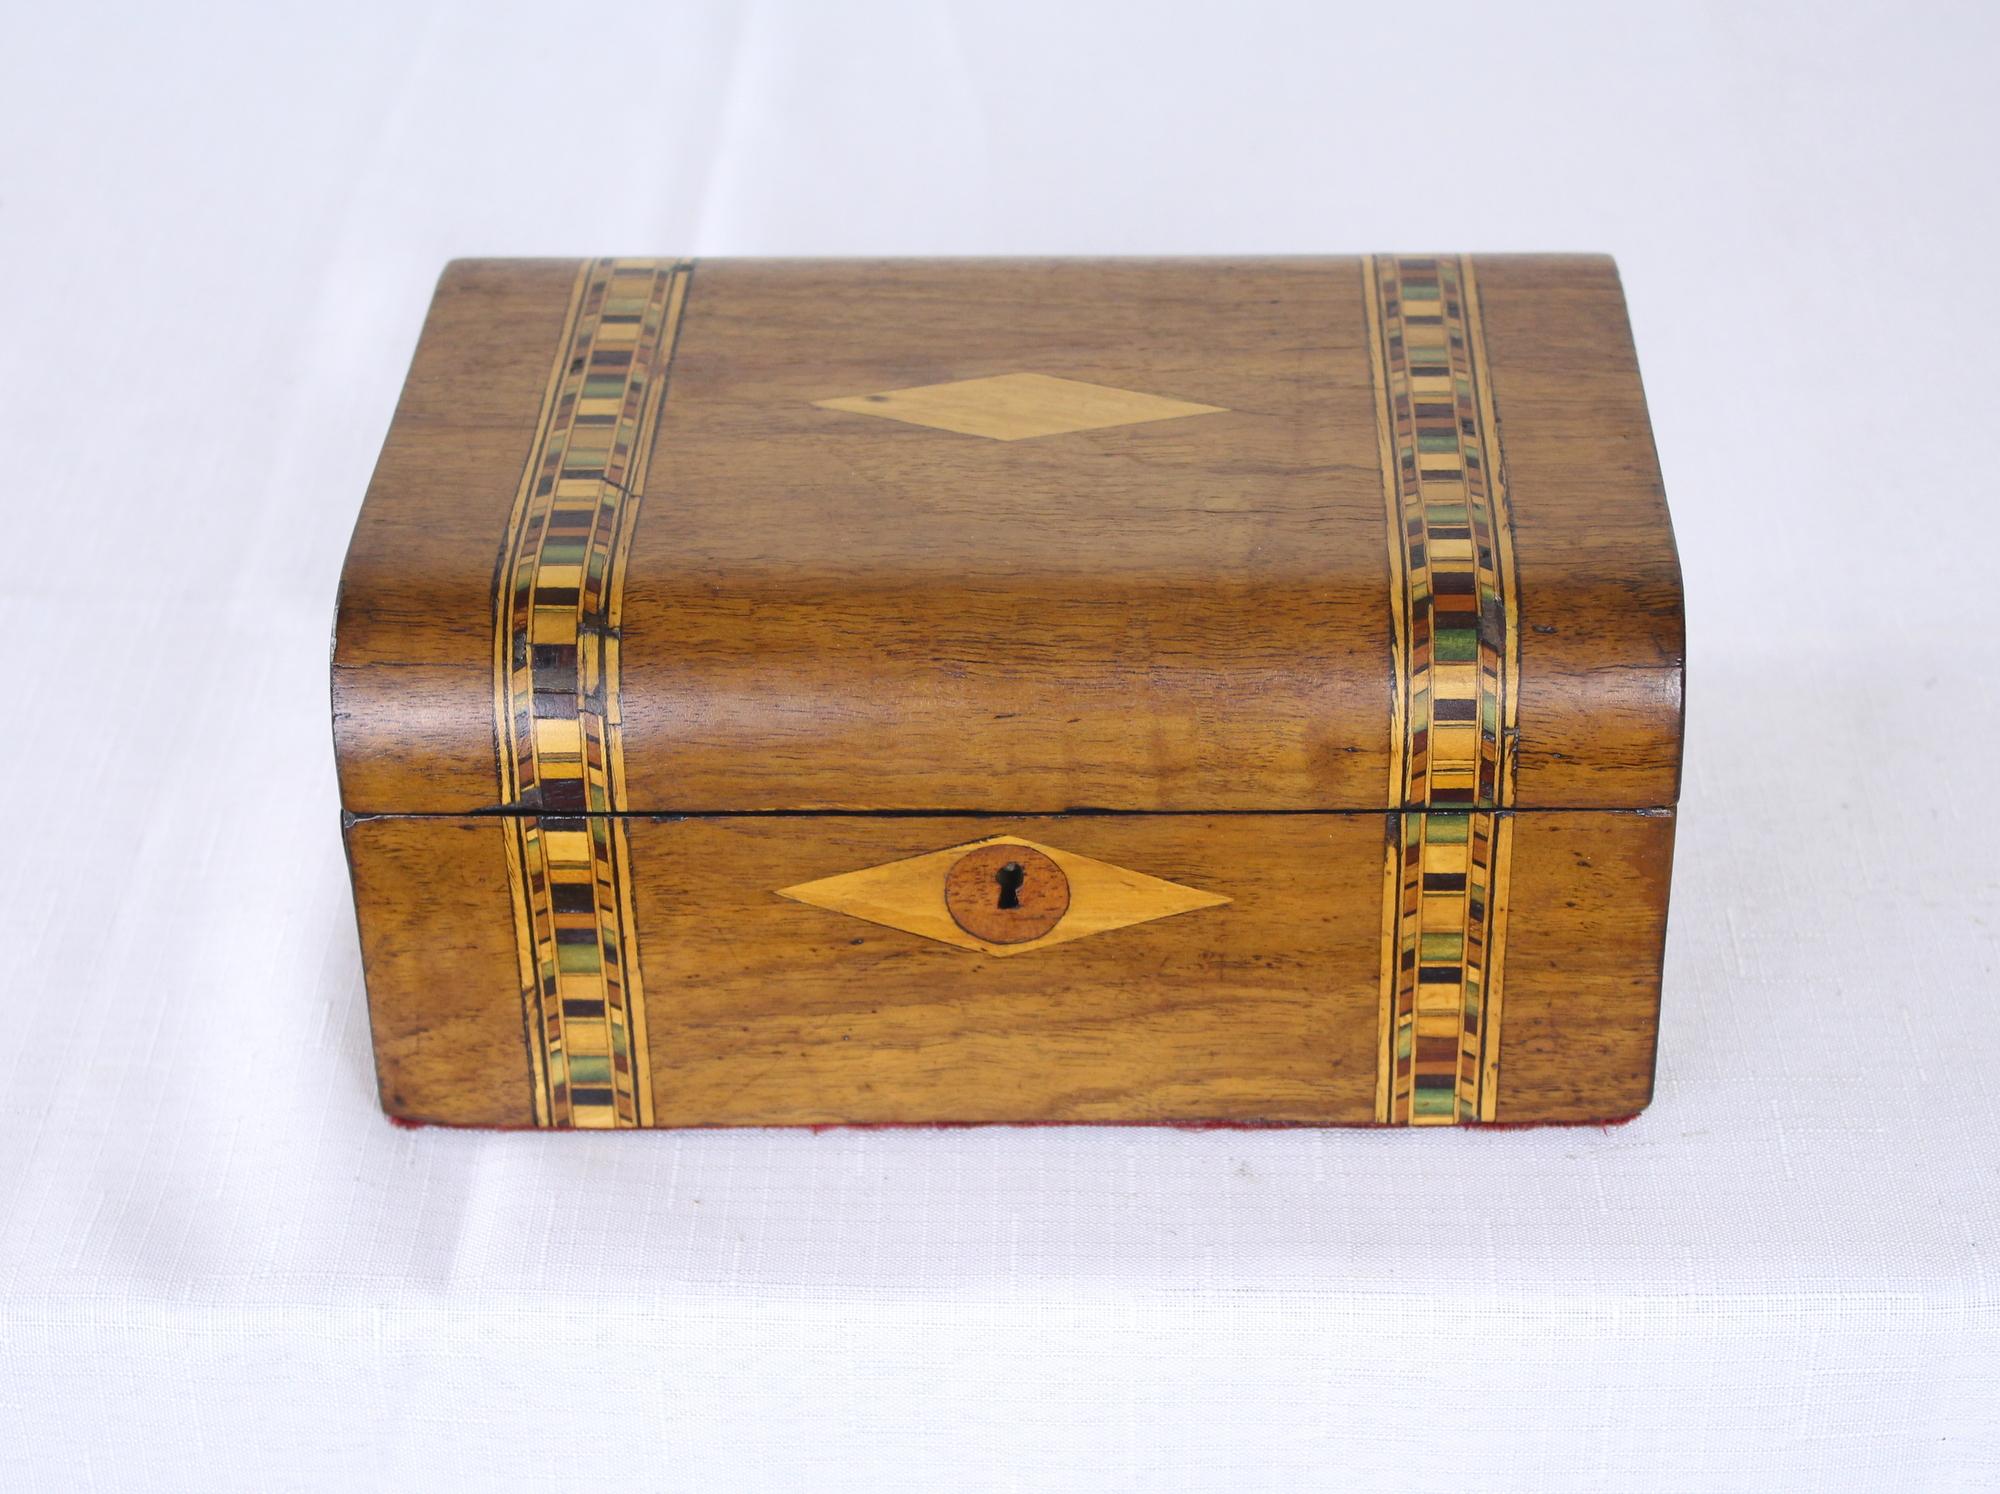 A walnut Tumbridgeware jewelry box. Tumbridgeware being characterized as a form of decoratively inlaid woodwork, typically in the form of boxes, that is characteristic of Tonbridge and the spa town of Royal Tunbridge Wells in Kent in the 18th and